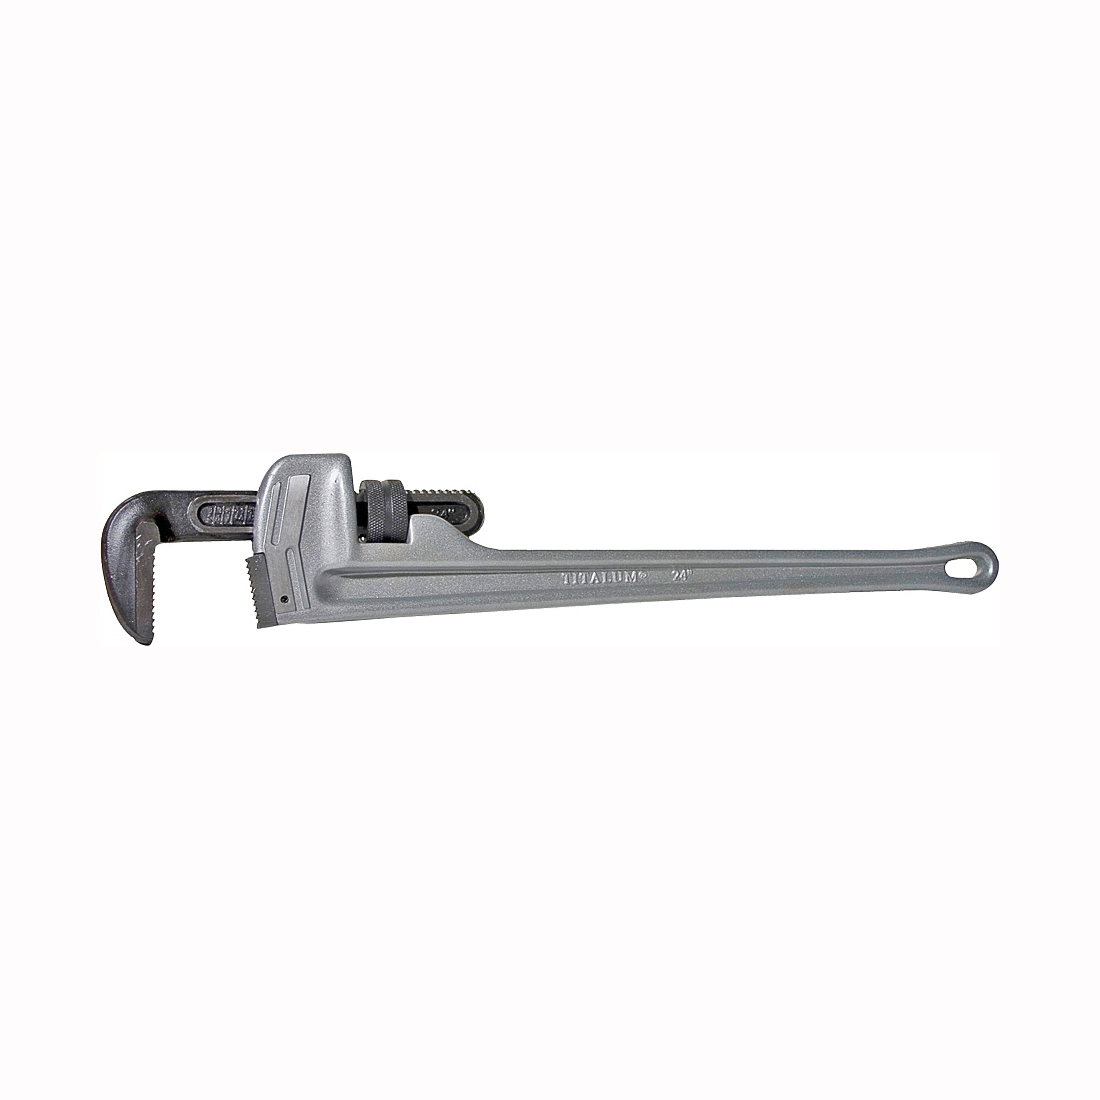 04824 Pipe Wrench, 3 in Jaw, 24 in L, Straight Jaw, Aluminum, Epoxy-Coated